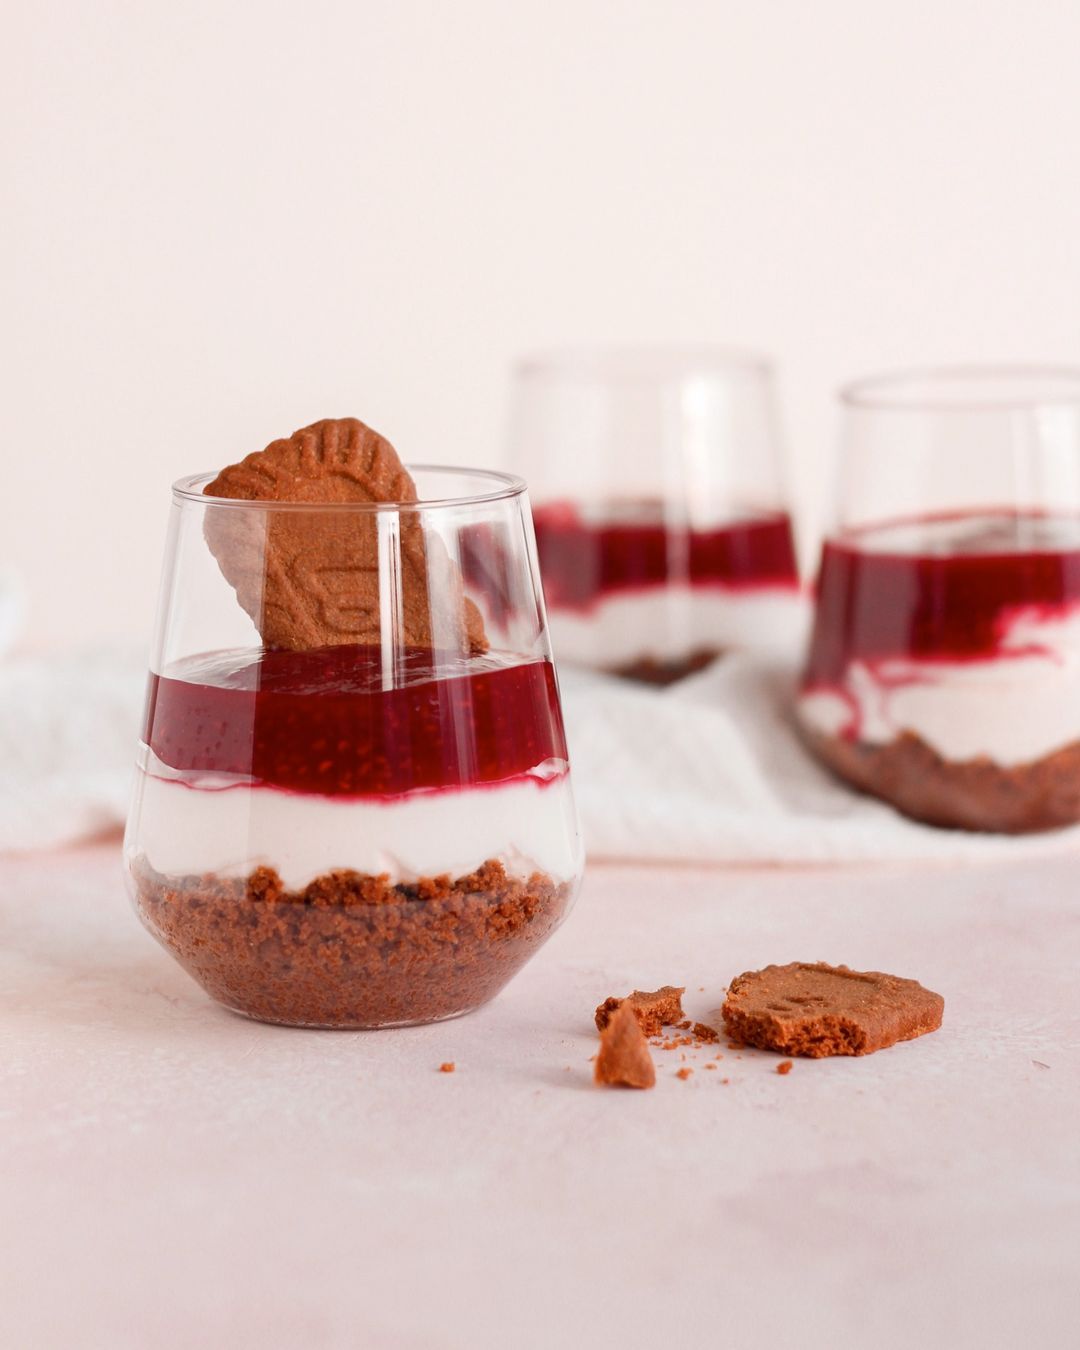 Cheesecake in a glass, with raspberry and speculoos